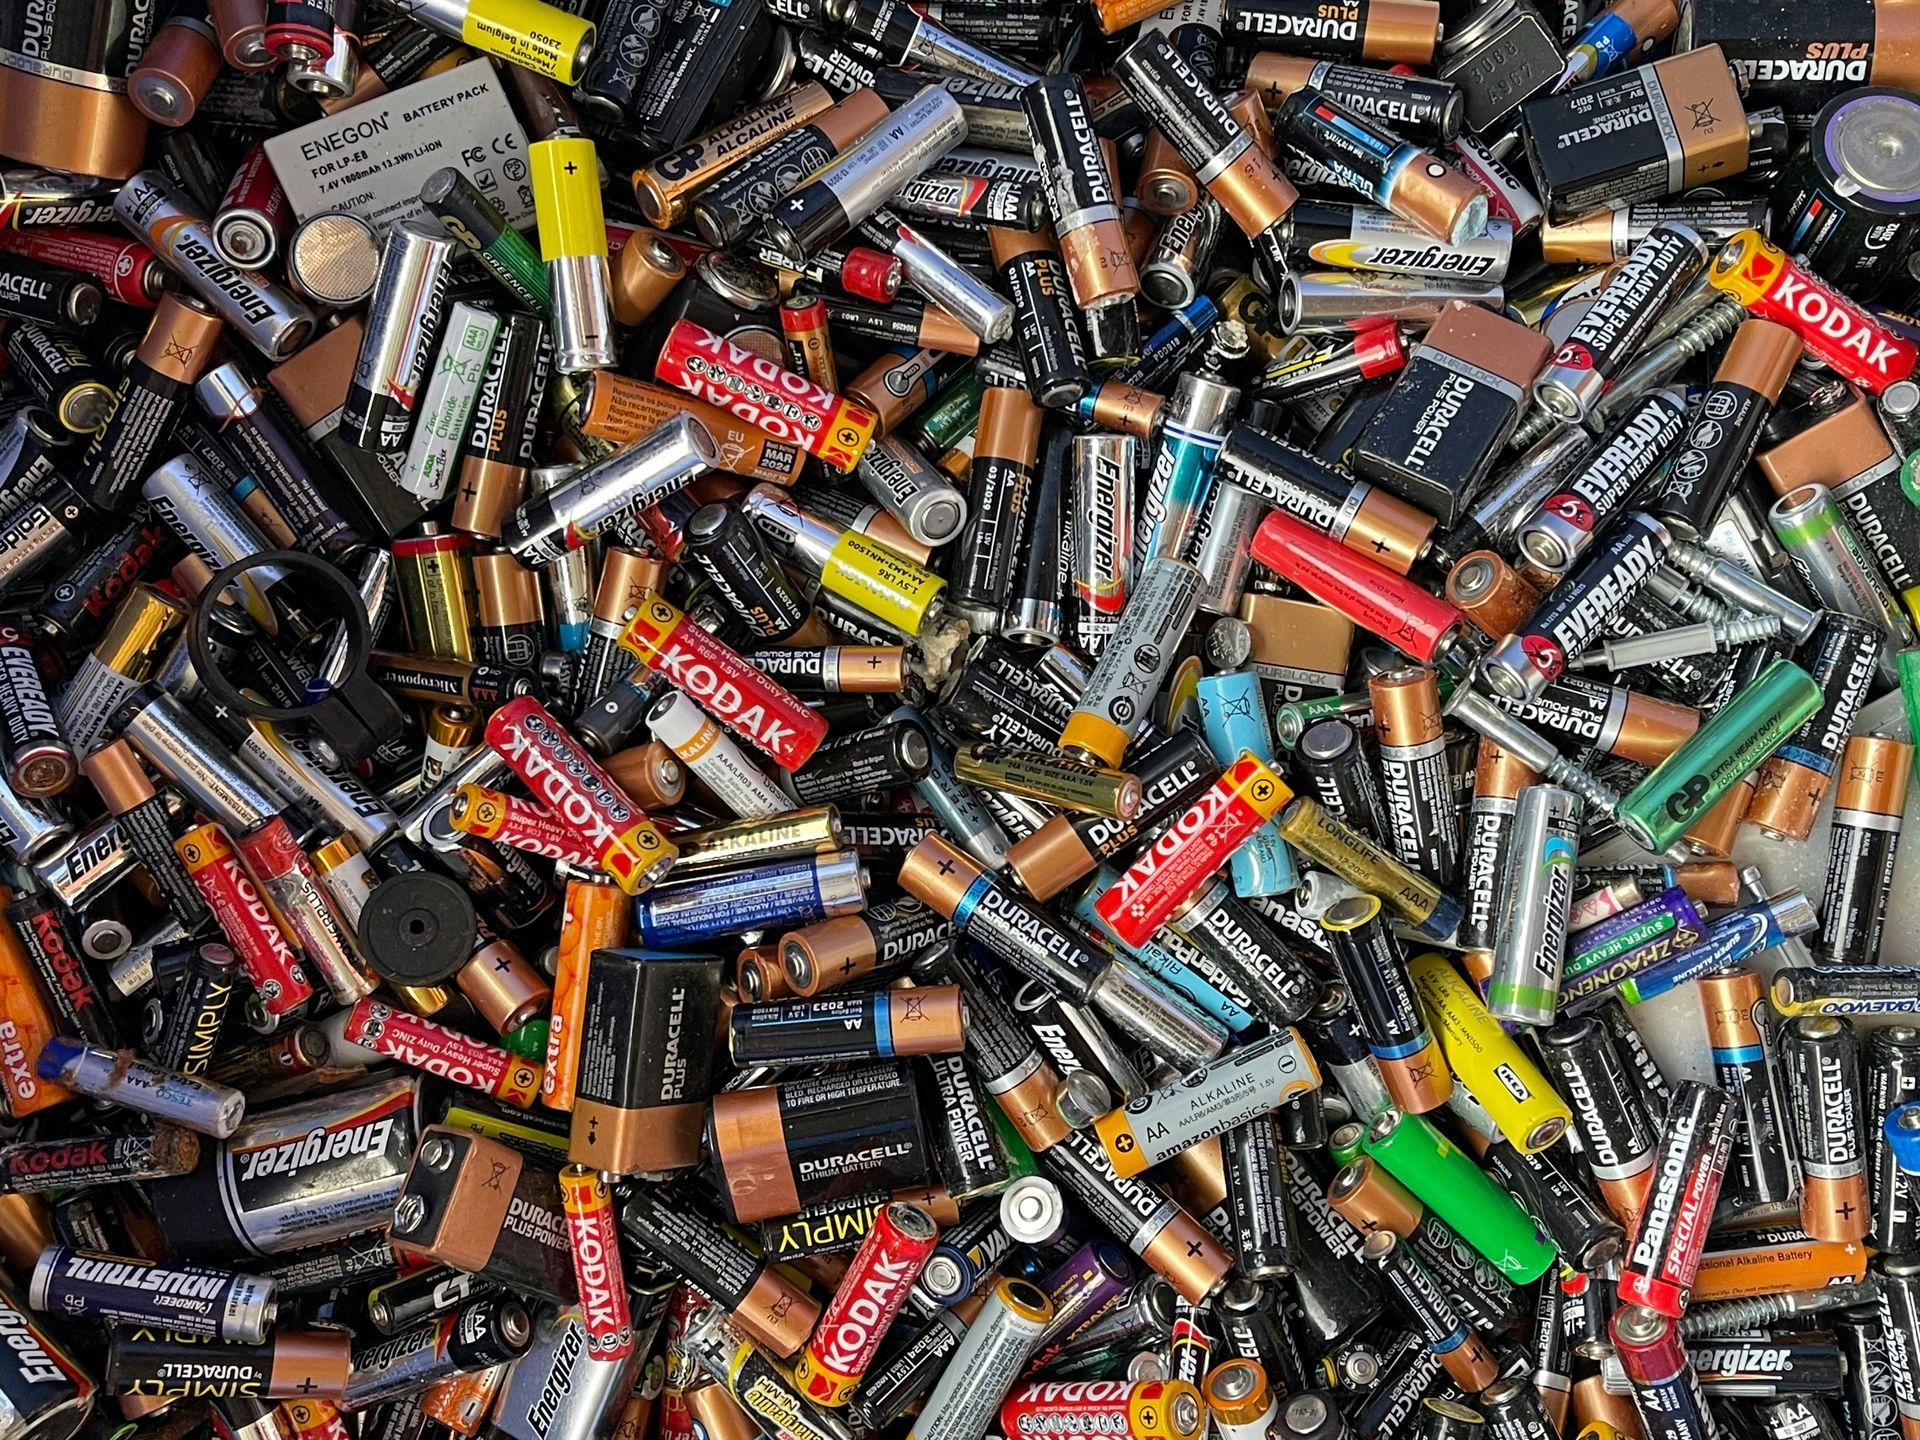 There are many different types of batteries in this pile.